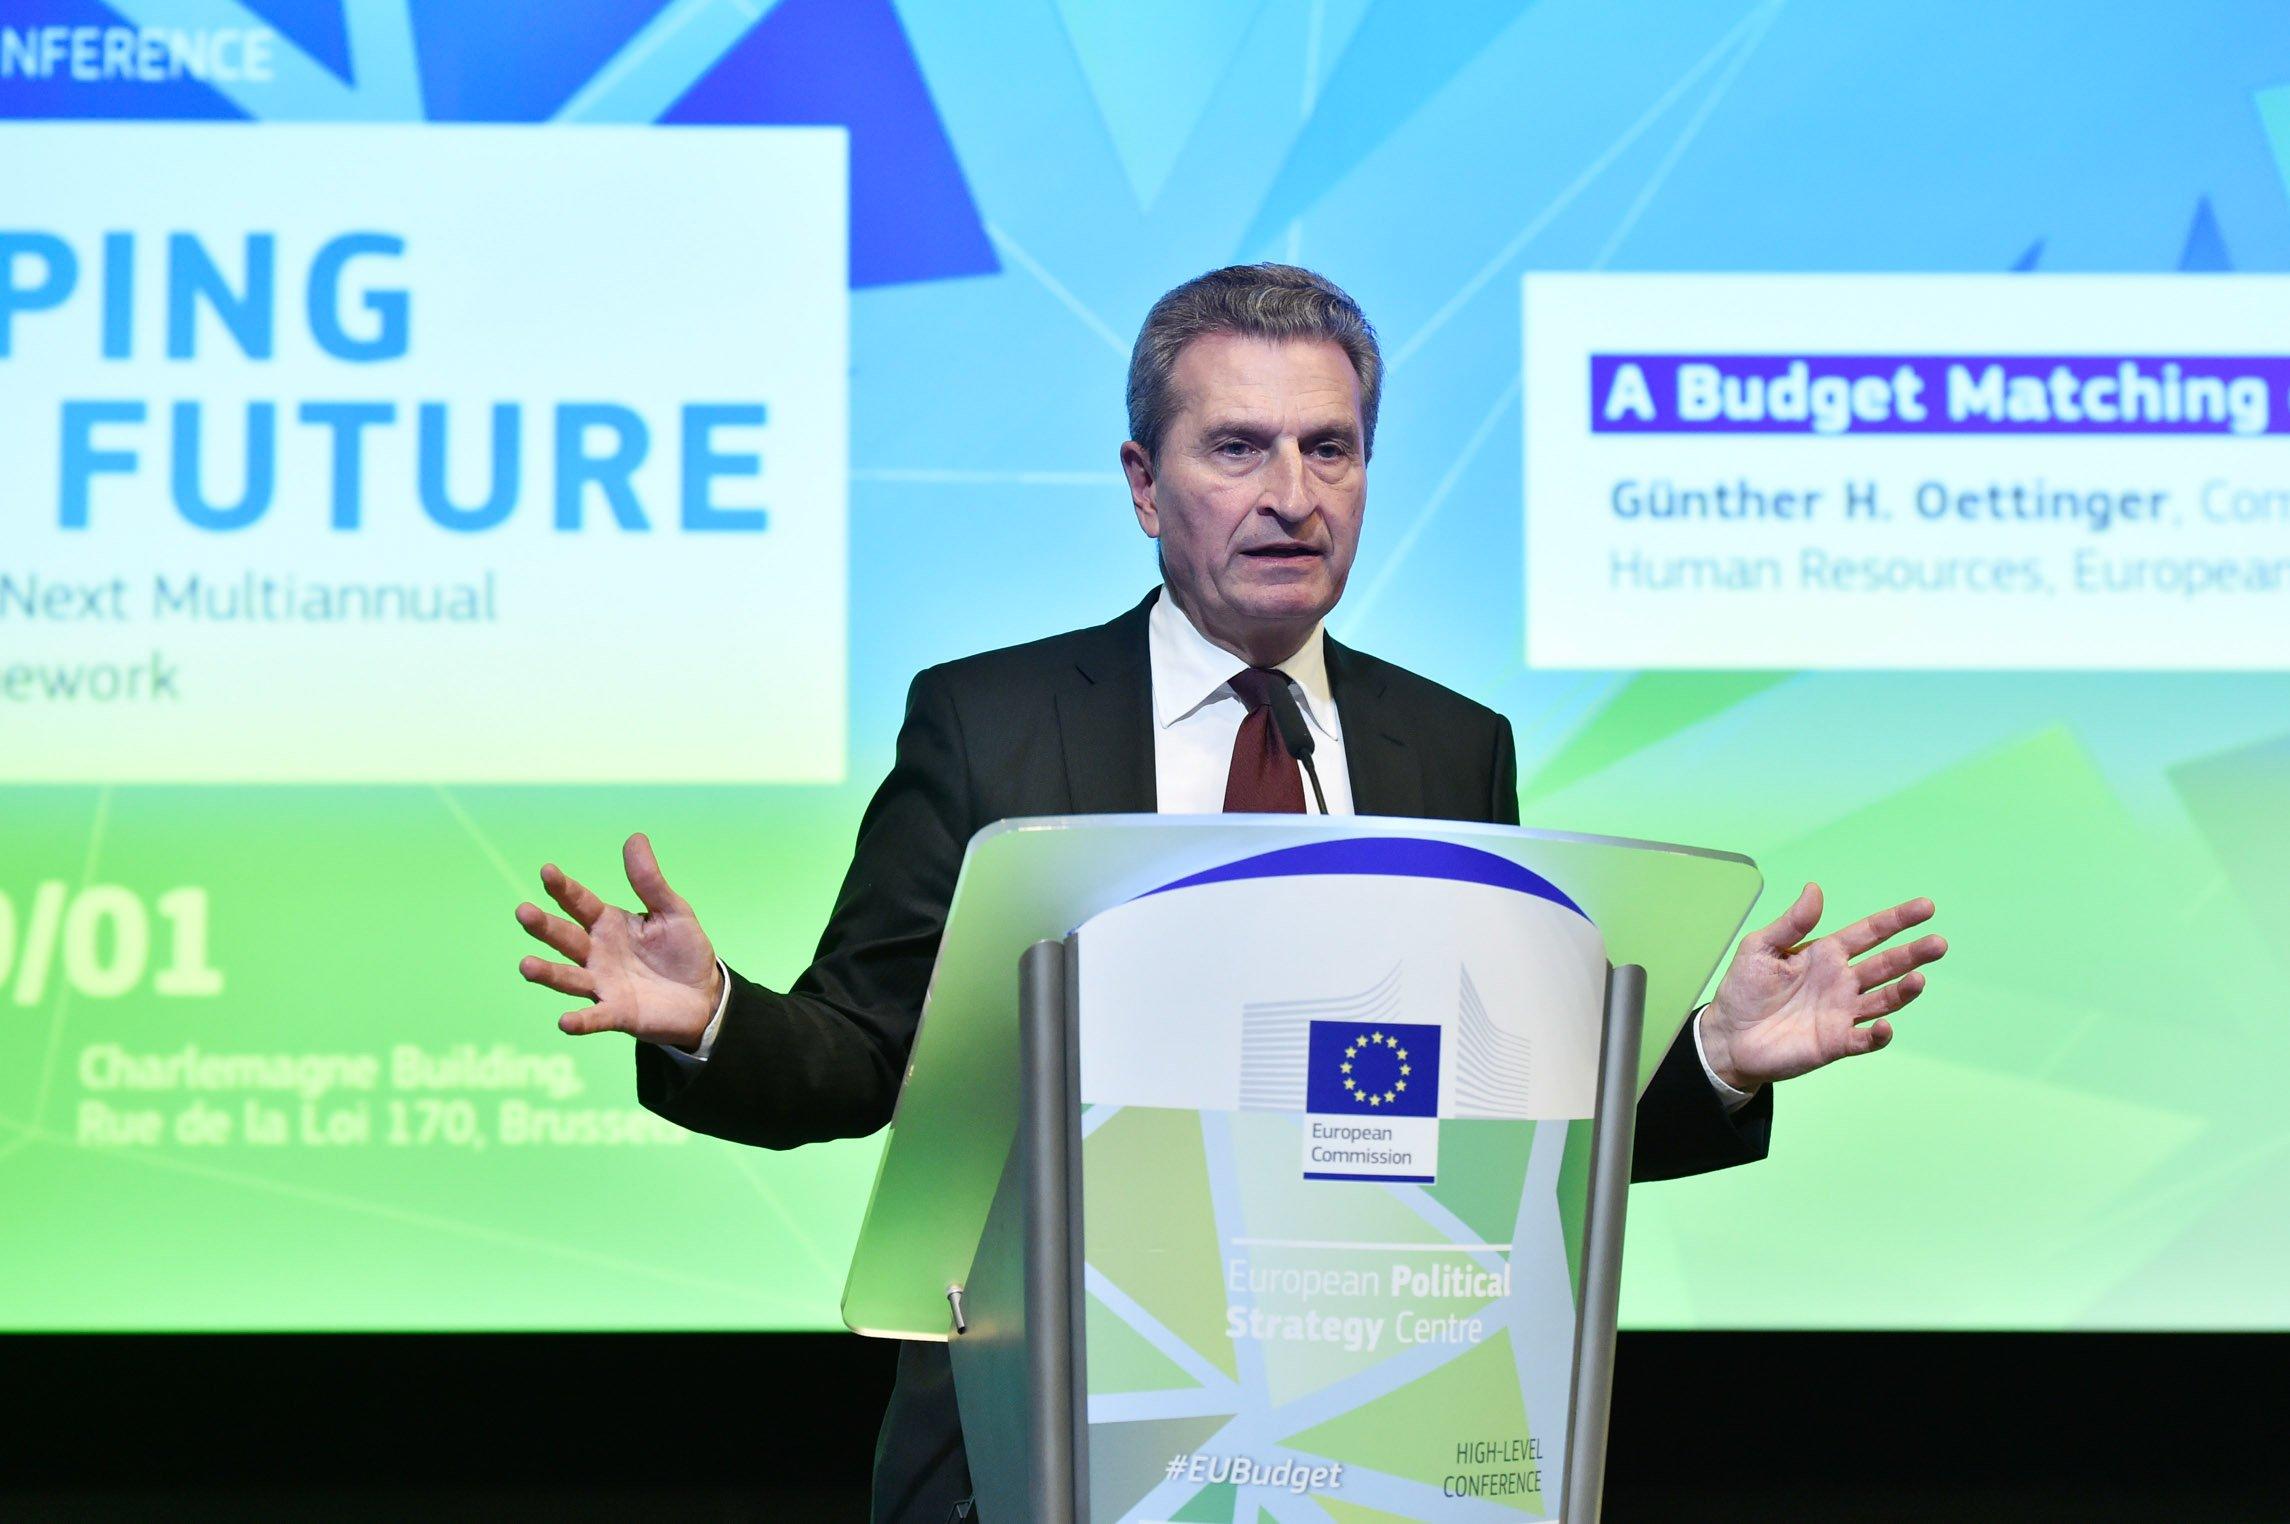 European Commissioner for Budget and Human Resources Gunther Oettinger gives a speech during the "Shaping our Future" high level conference at the Charlemagne building, European Commission, in Brussels, Belgium, January 8, 2018. European Commision/Eric Vidal